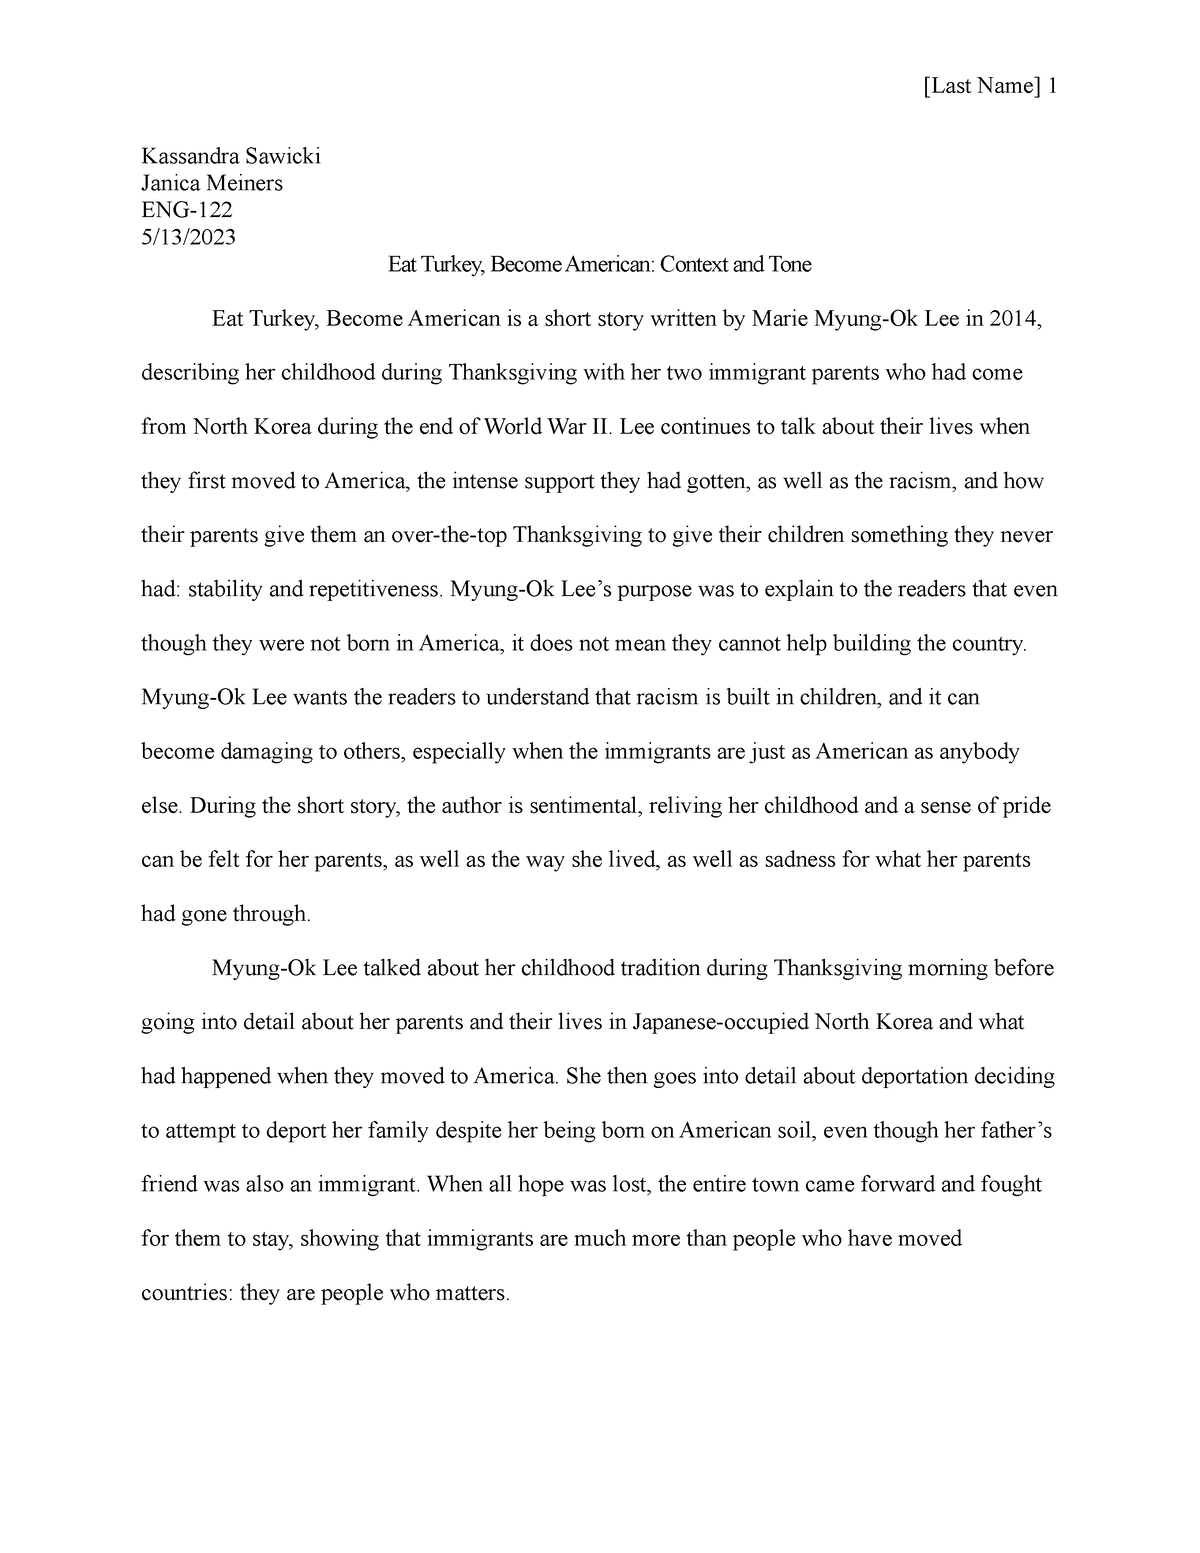 critical analysis essay of eat turkey become american